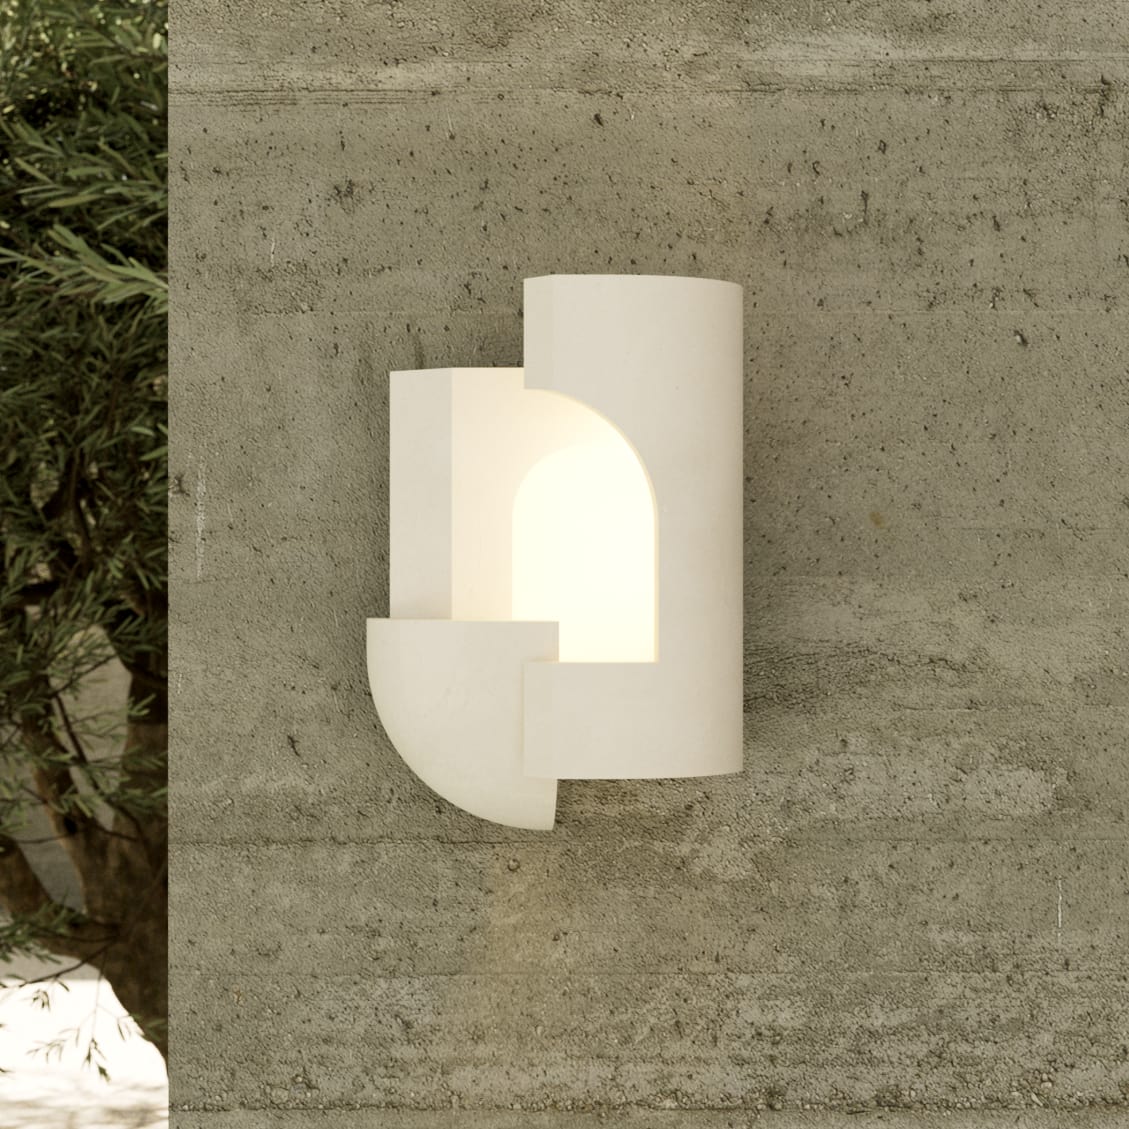  Soul Story Outdoor: Design Sconce Made of Concrete, IP64